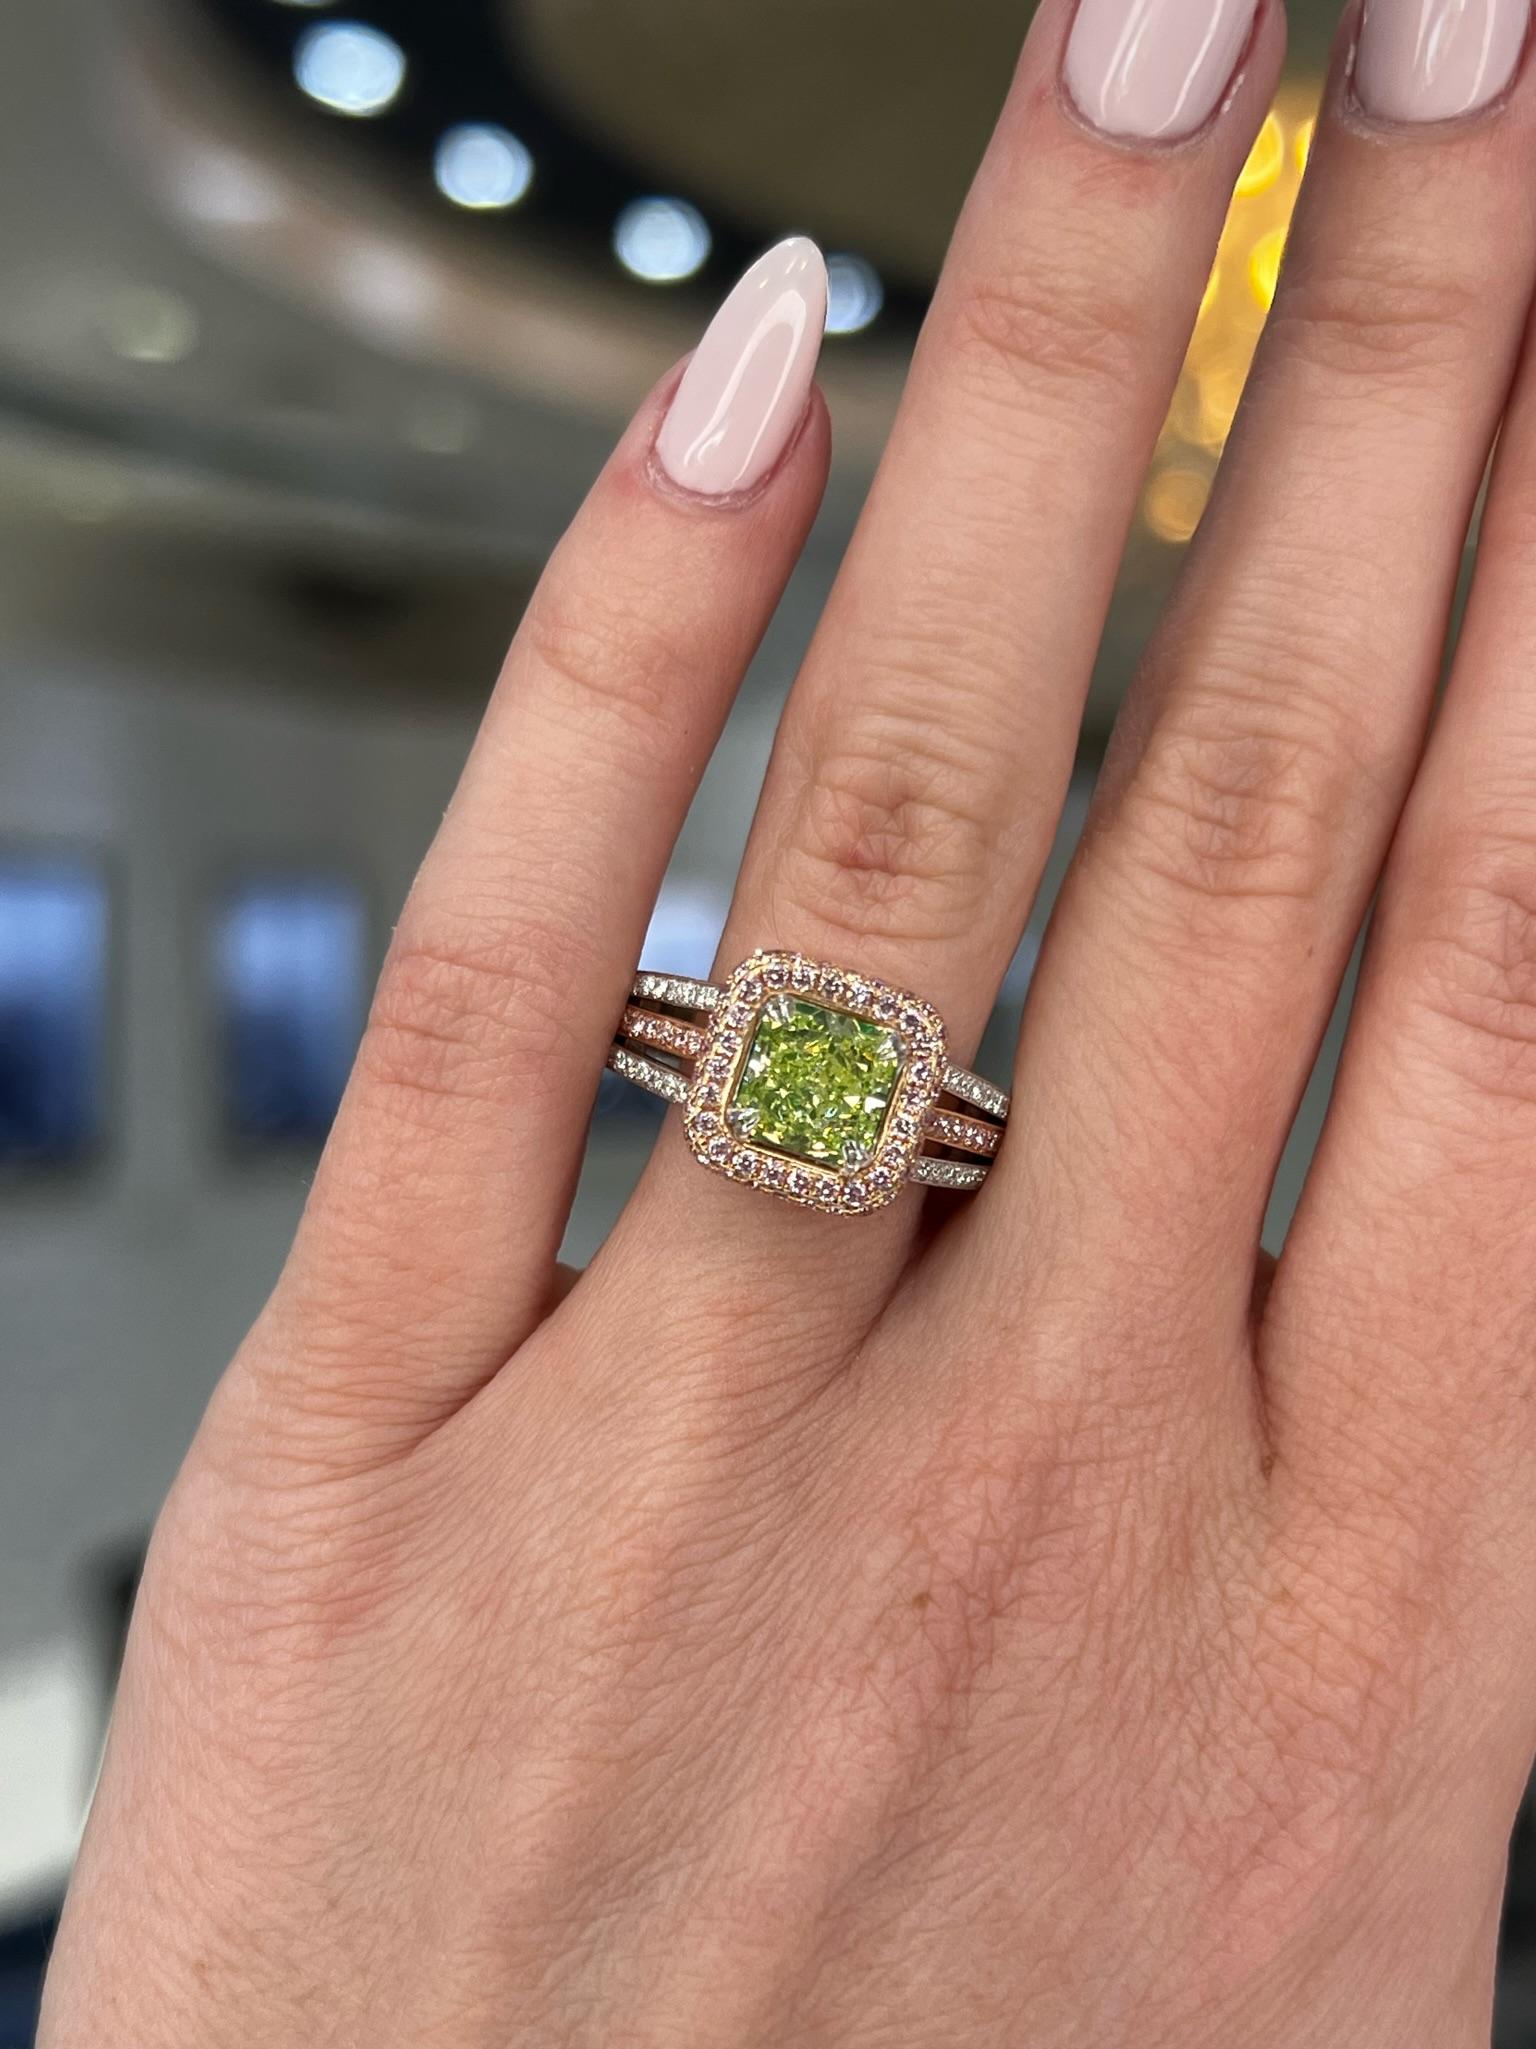 David Rosenberg 1.77 Carat Radiant Yellow, Green GIA Diamond Engagement Ring In New Condition For Sale In Boca Raton, FL